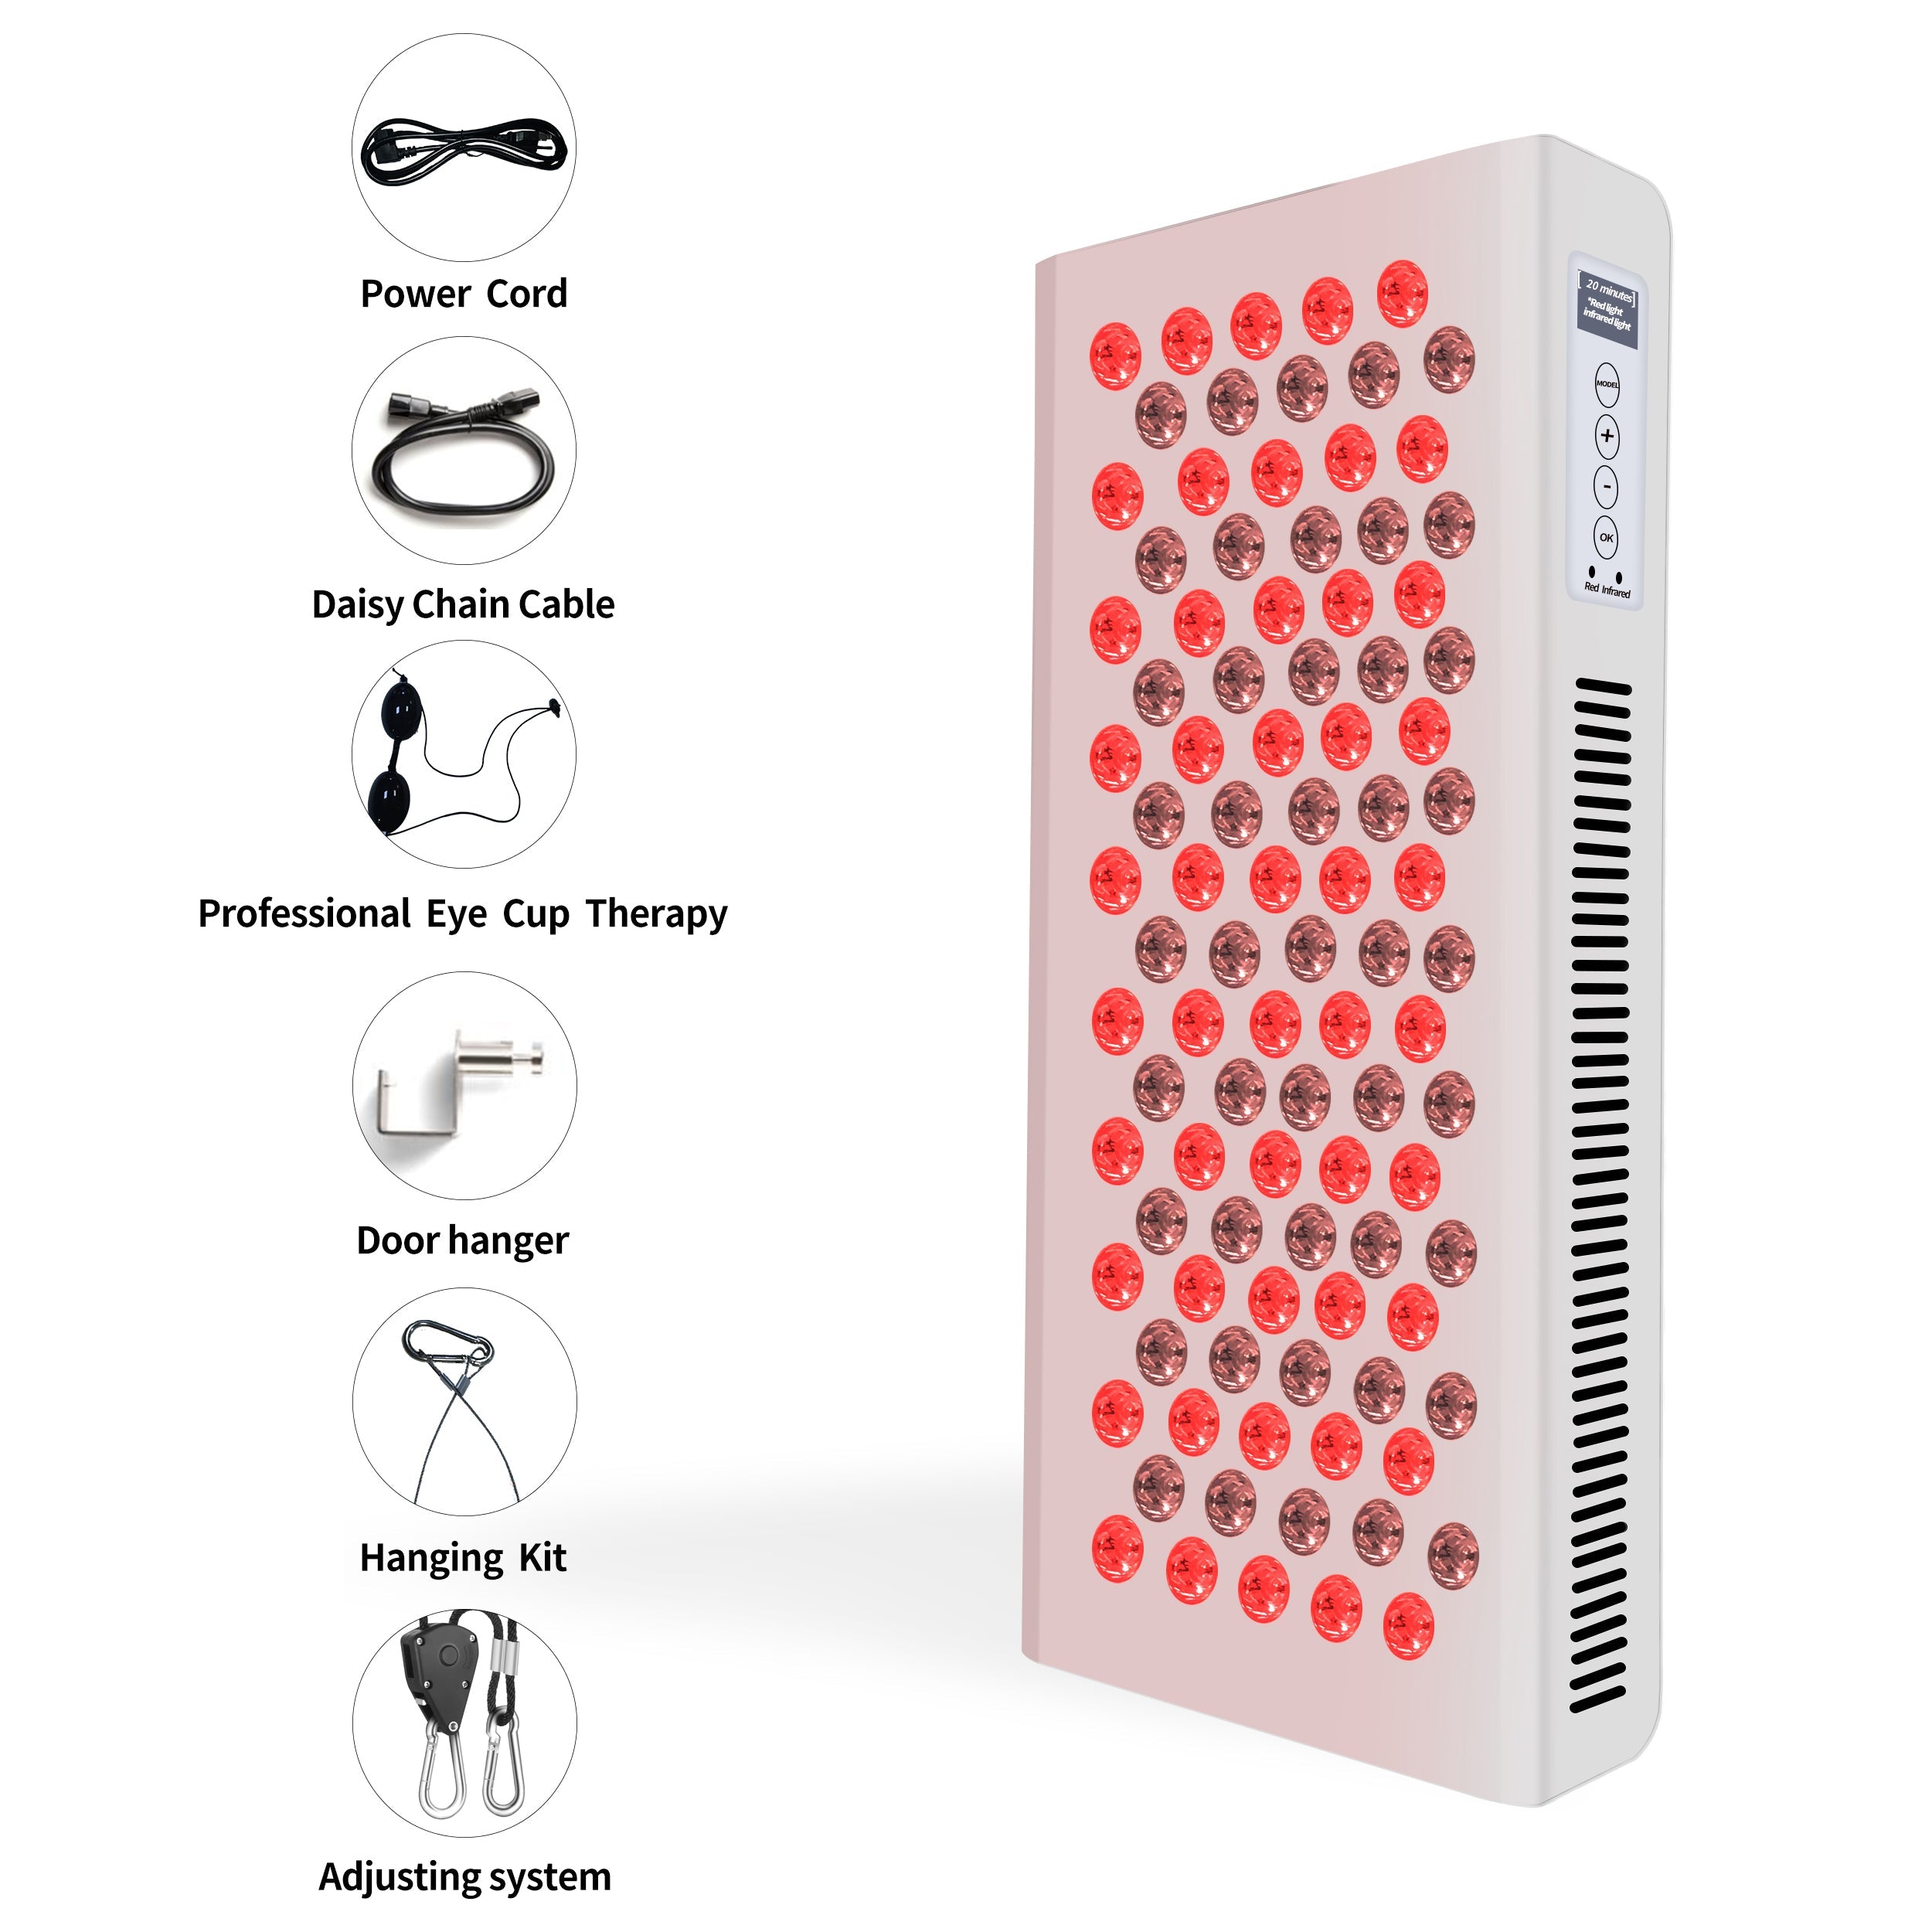 Pro LED Red Light Therapy 1500 Mighty